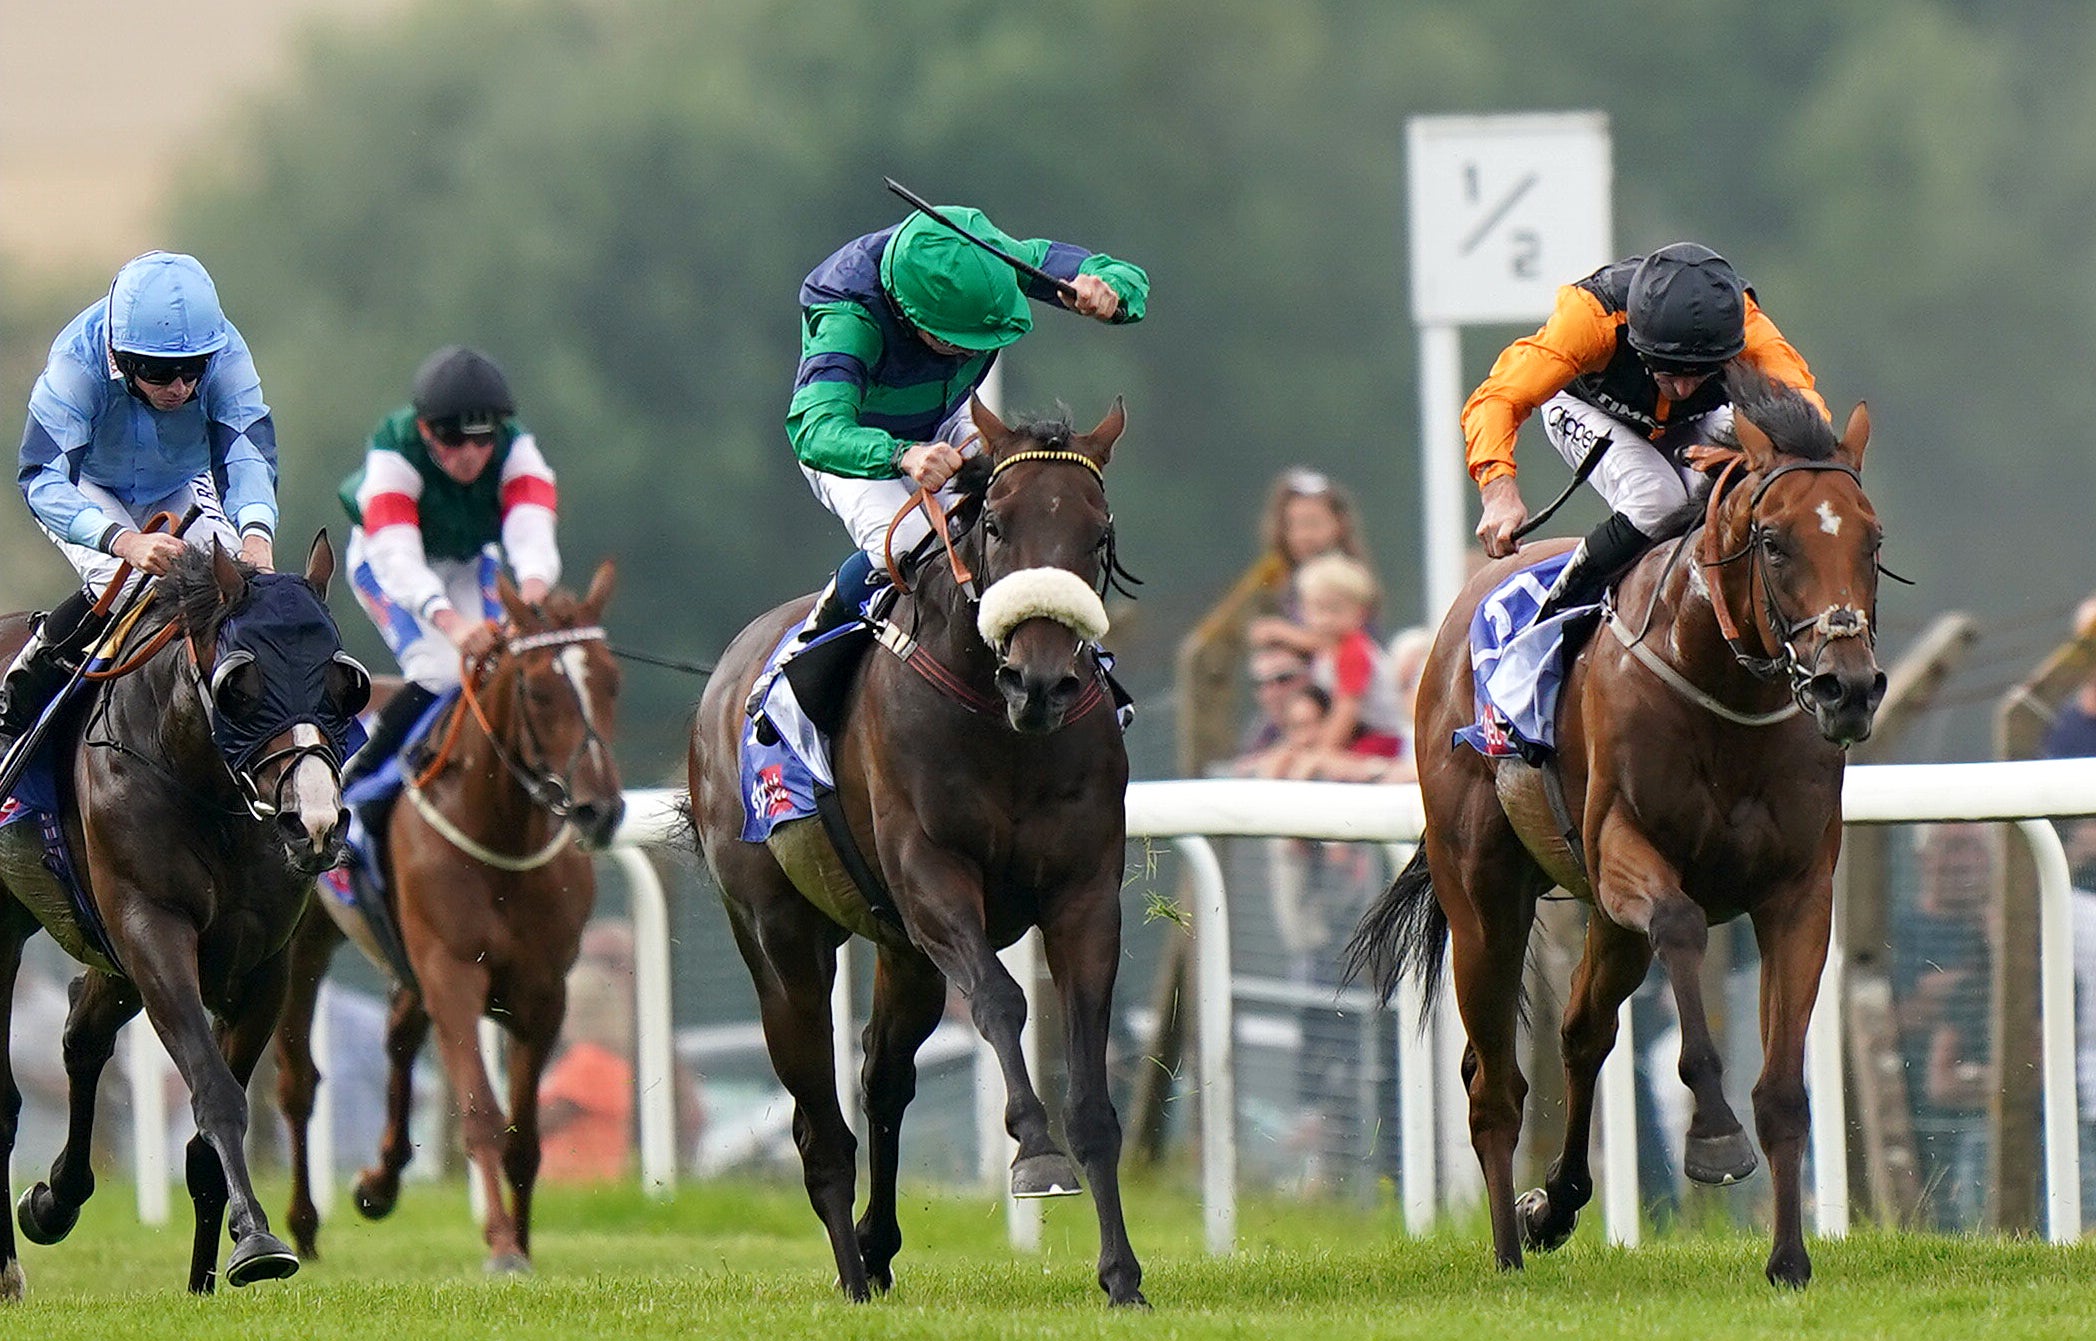 Brunch and William Buick (centre, green) coming home to win the Sky Bet Go-Racing-In-Yorkshire Summer Festival Pomfret Stakes at Pontefract (Tim Goode/PA)